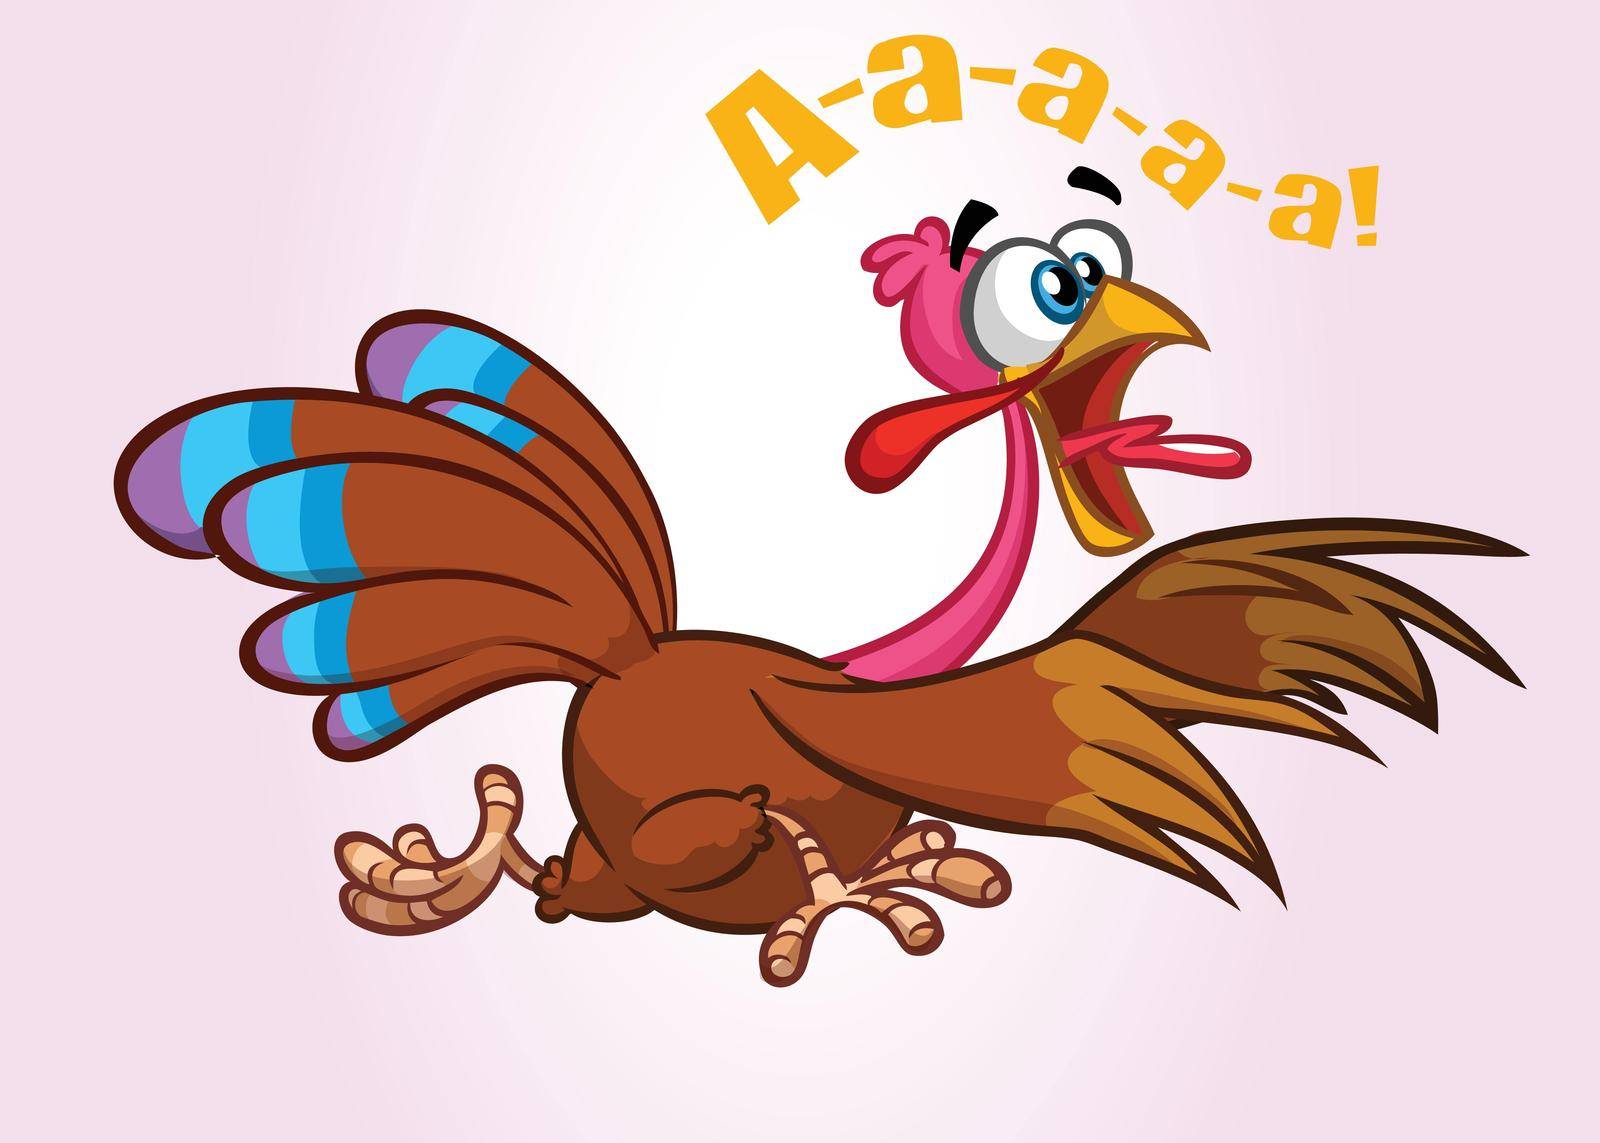 Cartoon illustration of a happy cute thanksgiving turkey. Vector illustration isolated. Design for Thanksgiving Day by drawkman